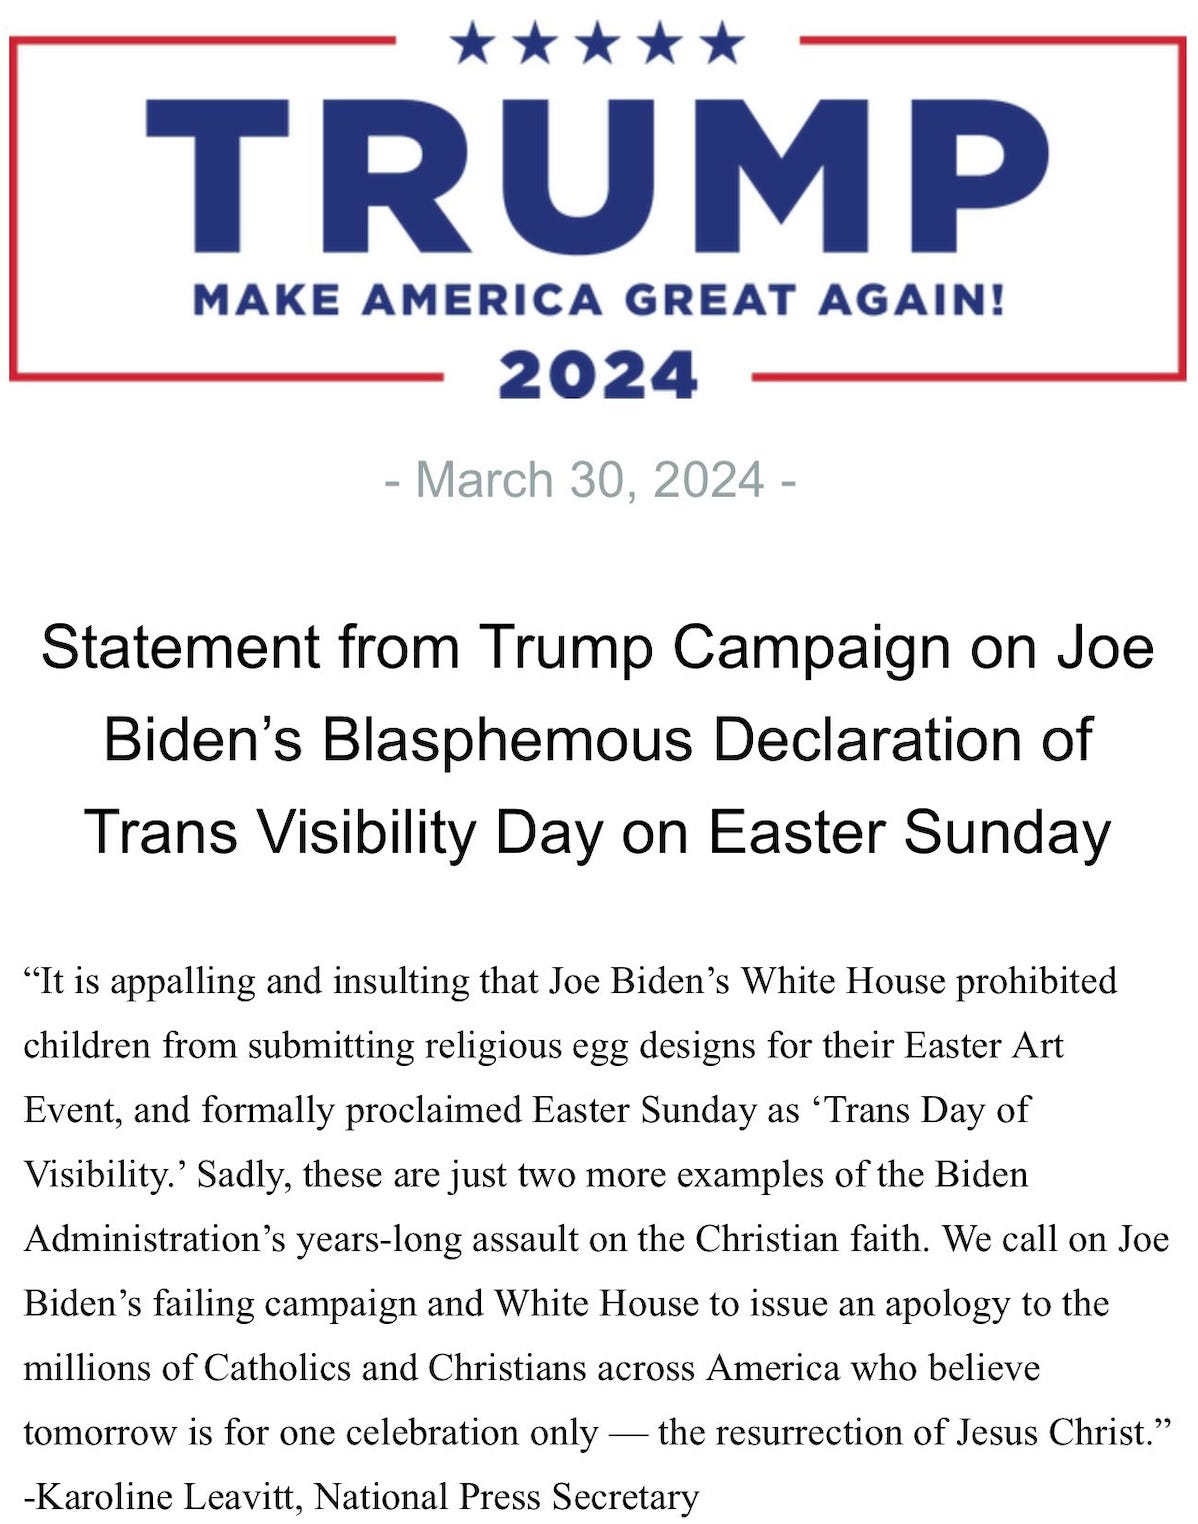 Statement from Trump Campaign on Joe Biden's Blasphemous Declaration of Trans Visibility Day on Easter Sunday "It is appalling and insulting that Joe Biden's White House prohibited children from submitting religious egg designs for their Easter Art Event, and formally proclaimed Easter Sunday as 'Trans Day of Visibility.' Sadly, these are just two more examples of the Biden Administration's years-long assault on the Christian faith. We call on Joe Biden's failing campaign and White House to issue an apology to the millions of Catholics and Christians across America who believe tomorrow is for one celebration only - the resurrection of Jesus Christ." -Karoline Leavitt, National Press Secretary